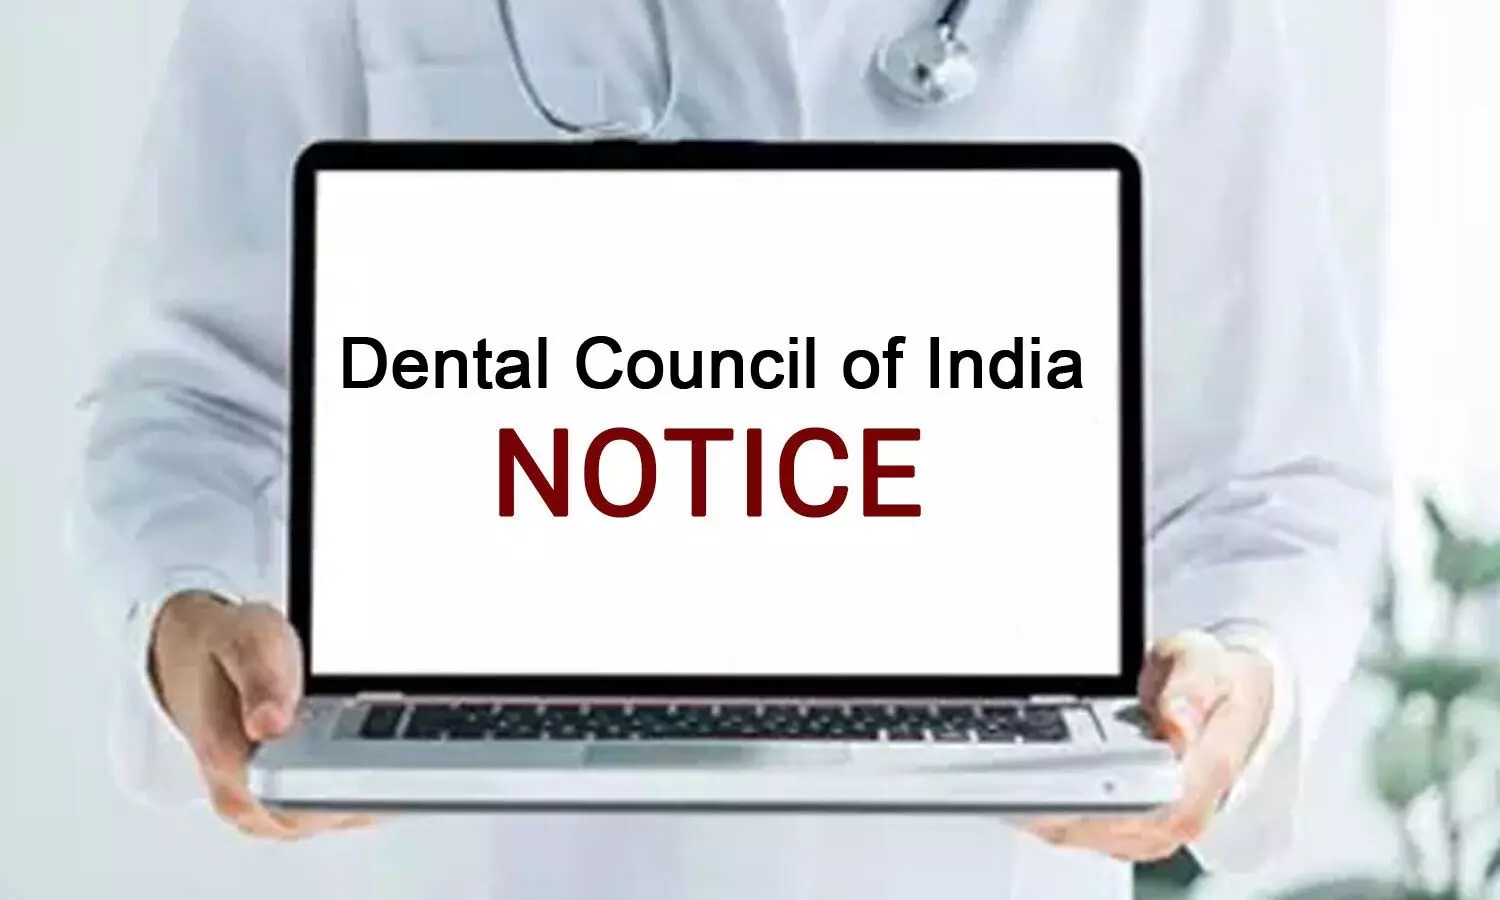 Dental Home Services not allowed: DCI cracks whip